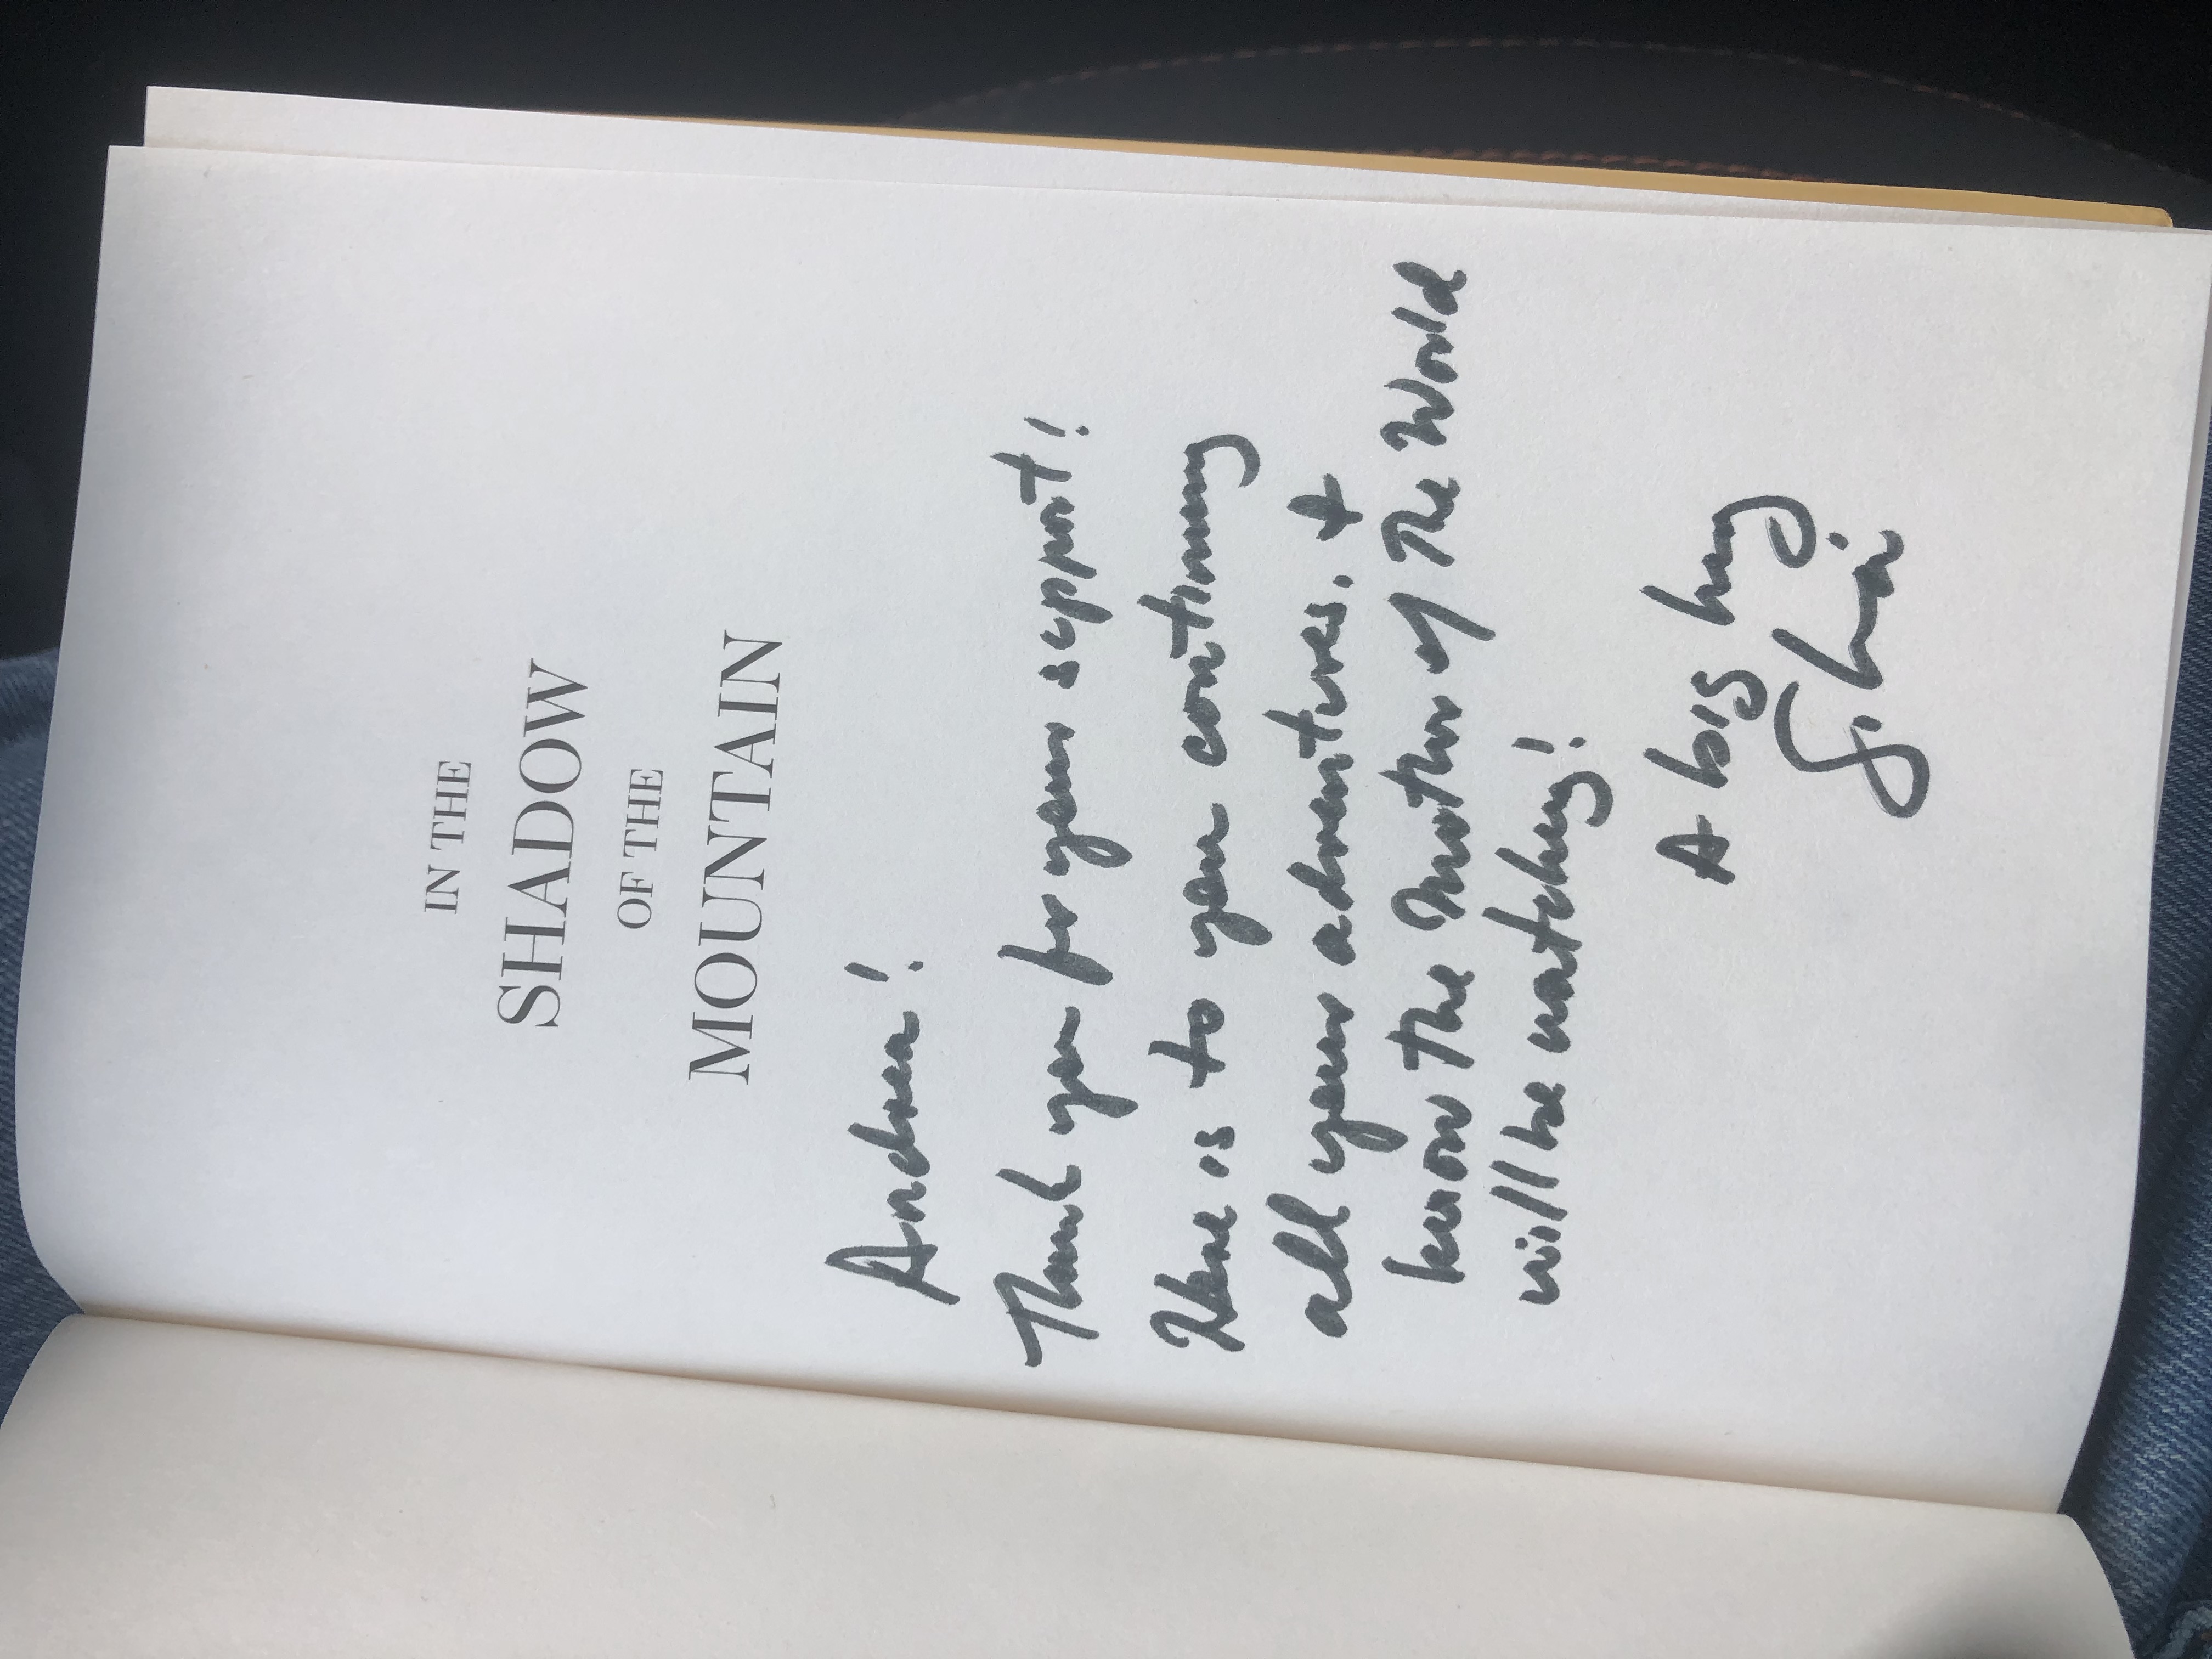 Inscription from book's author to blog writer